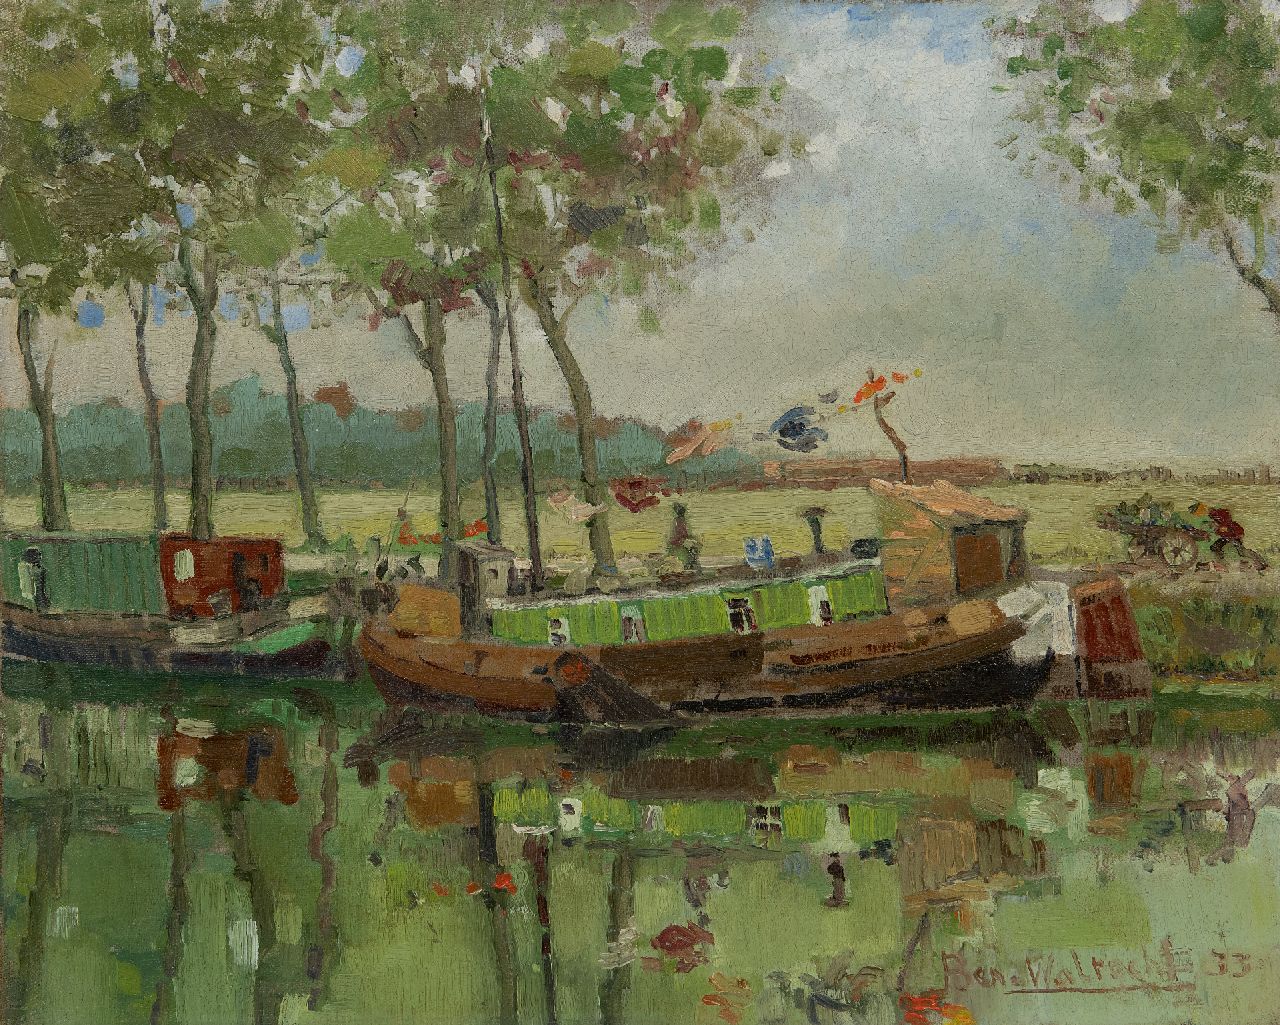 Walrecht B.H.D.  | Bernardus Hermannus David 'Ben' Walrecht, At Oldehove, oil on canvas laid down on panel 40.4 x 50.0 cm, signed l.r. and dated '33